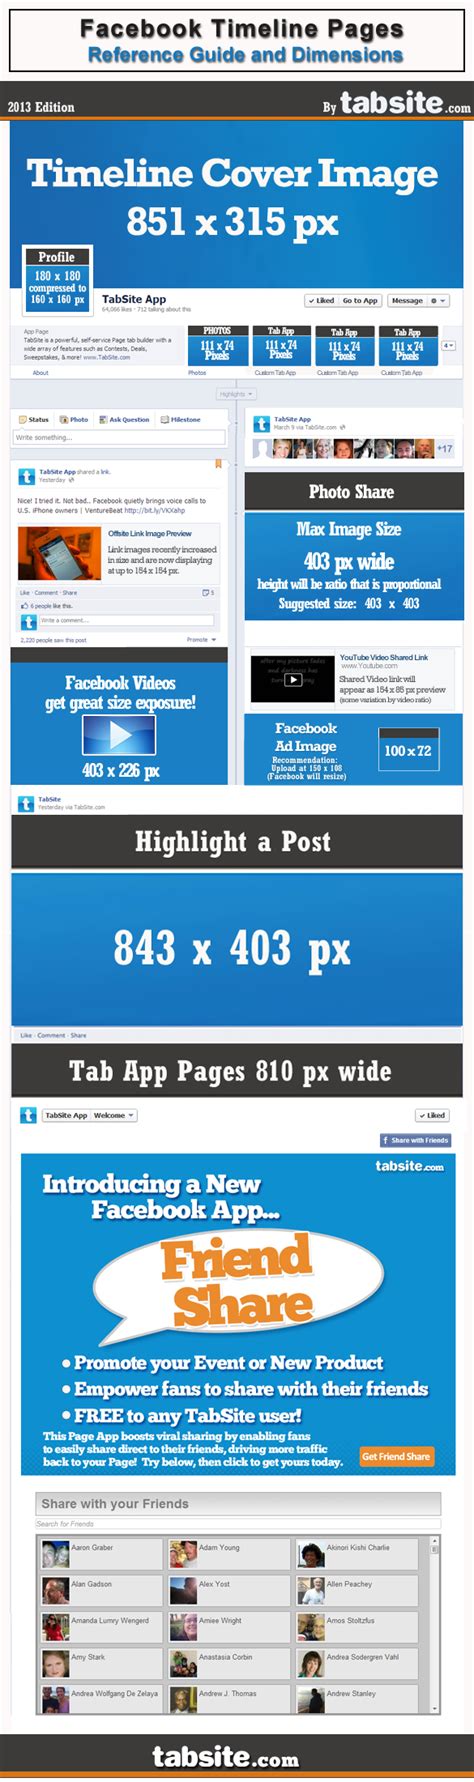 What is the facebook profile picture size or facebook banner size? Facebook Timeline for Pages Image Dimensions Infographic